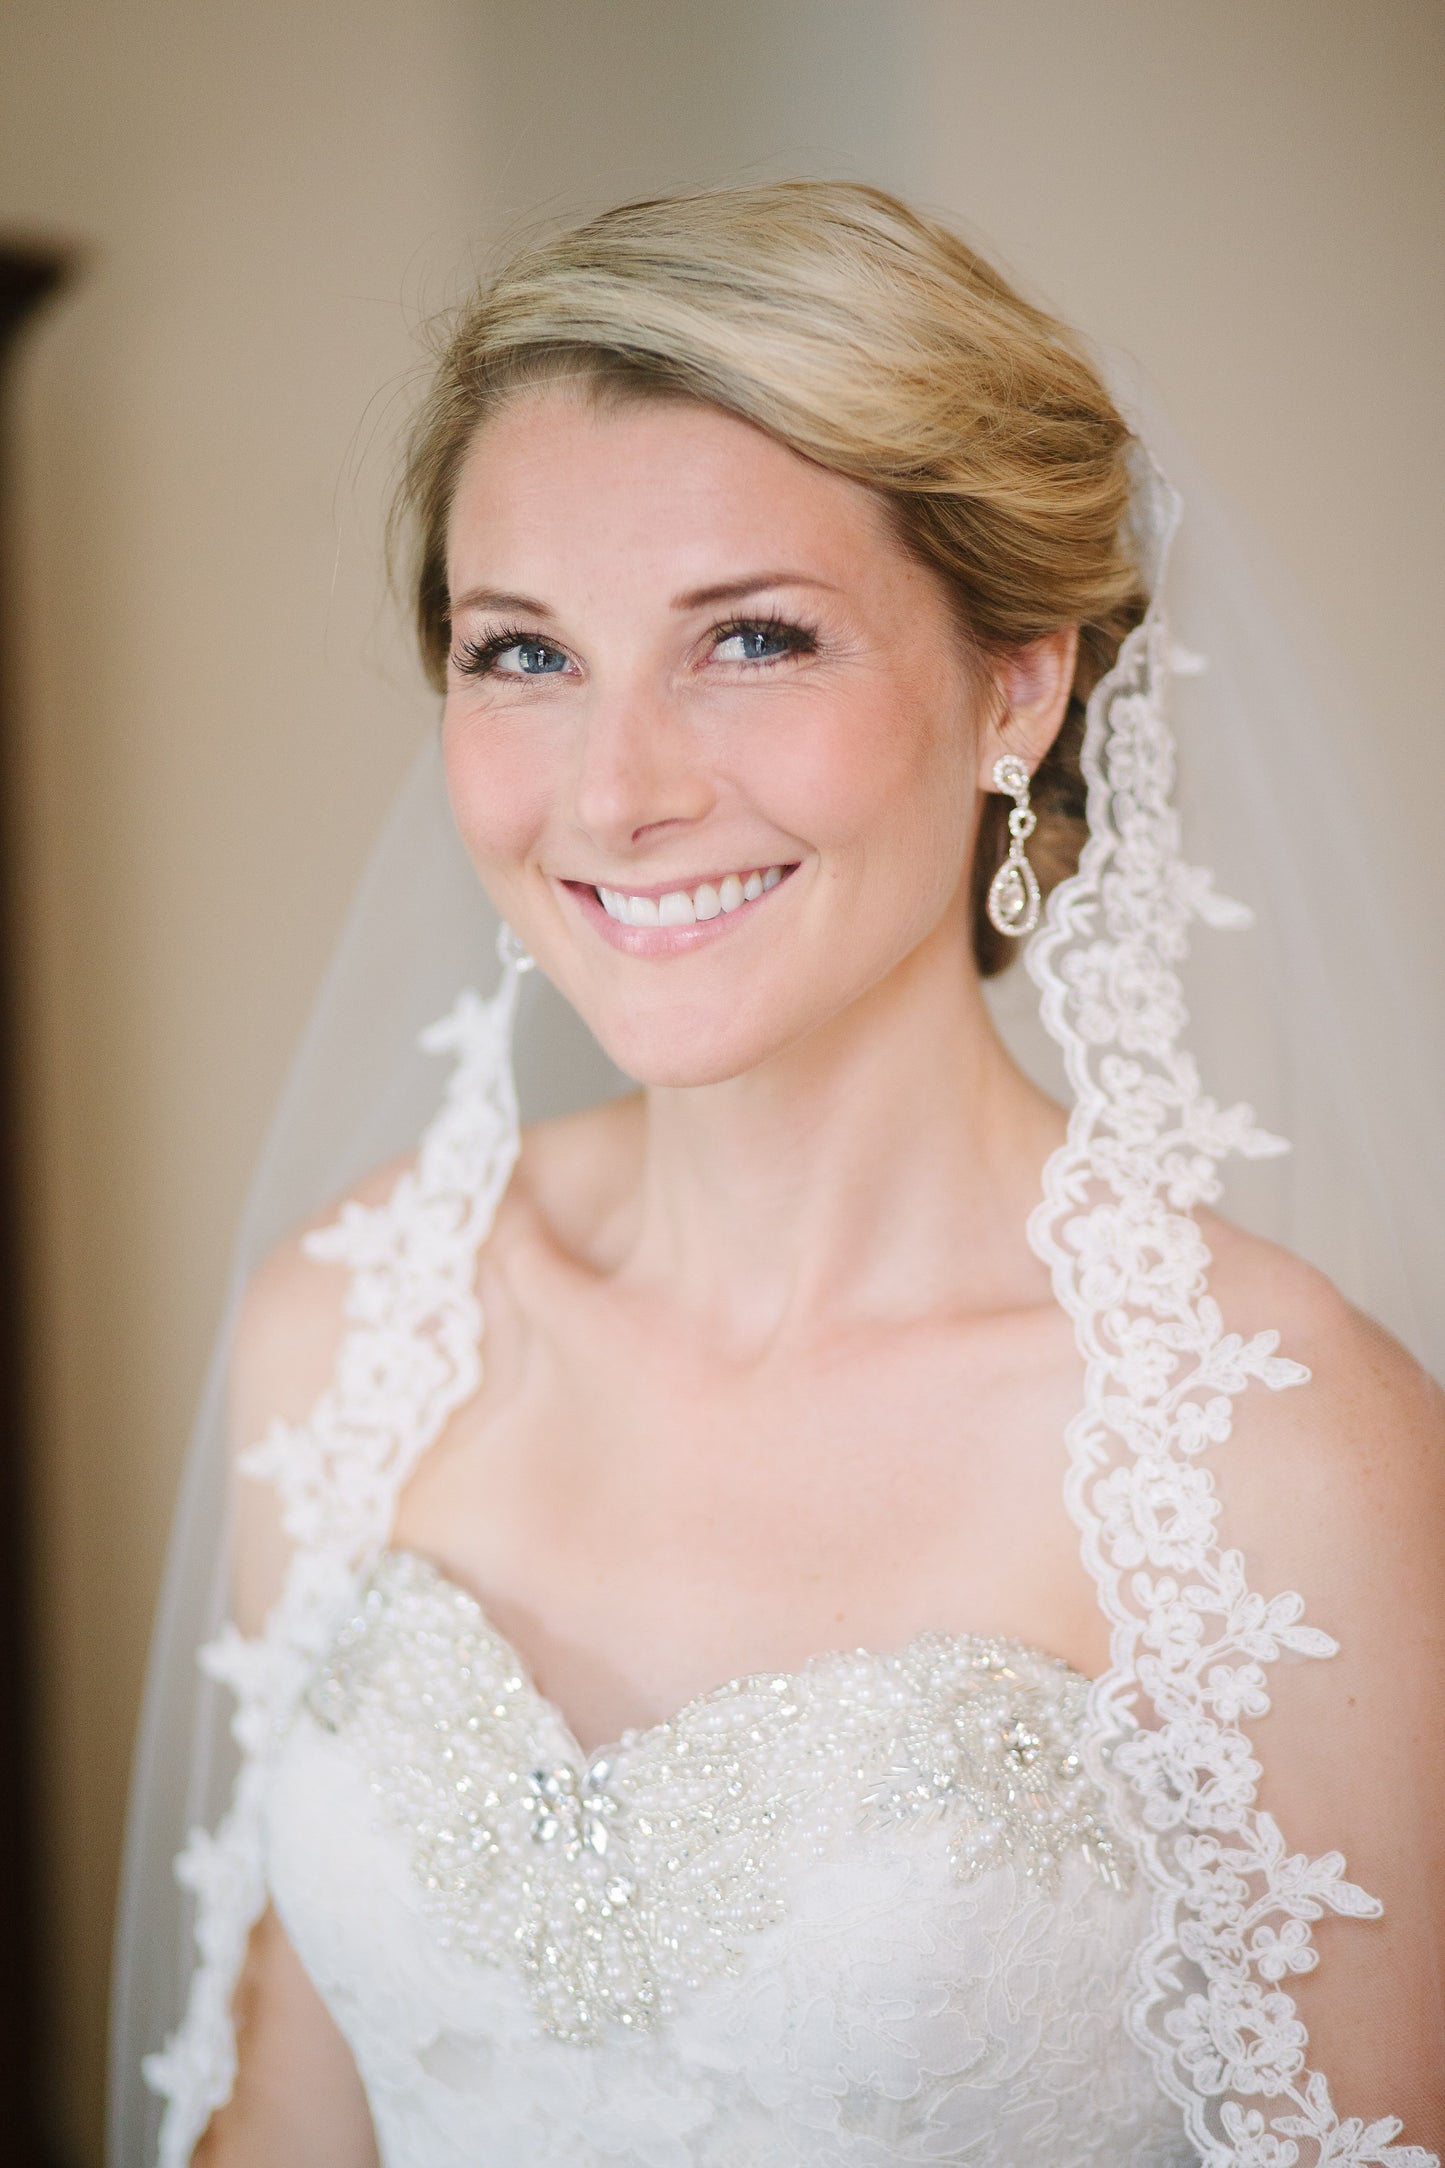 Elegant Bridal Updo With French Alencon Lace Wedding Veil and Drop Earrings